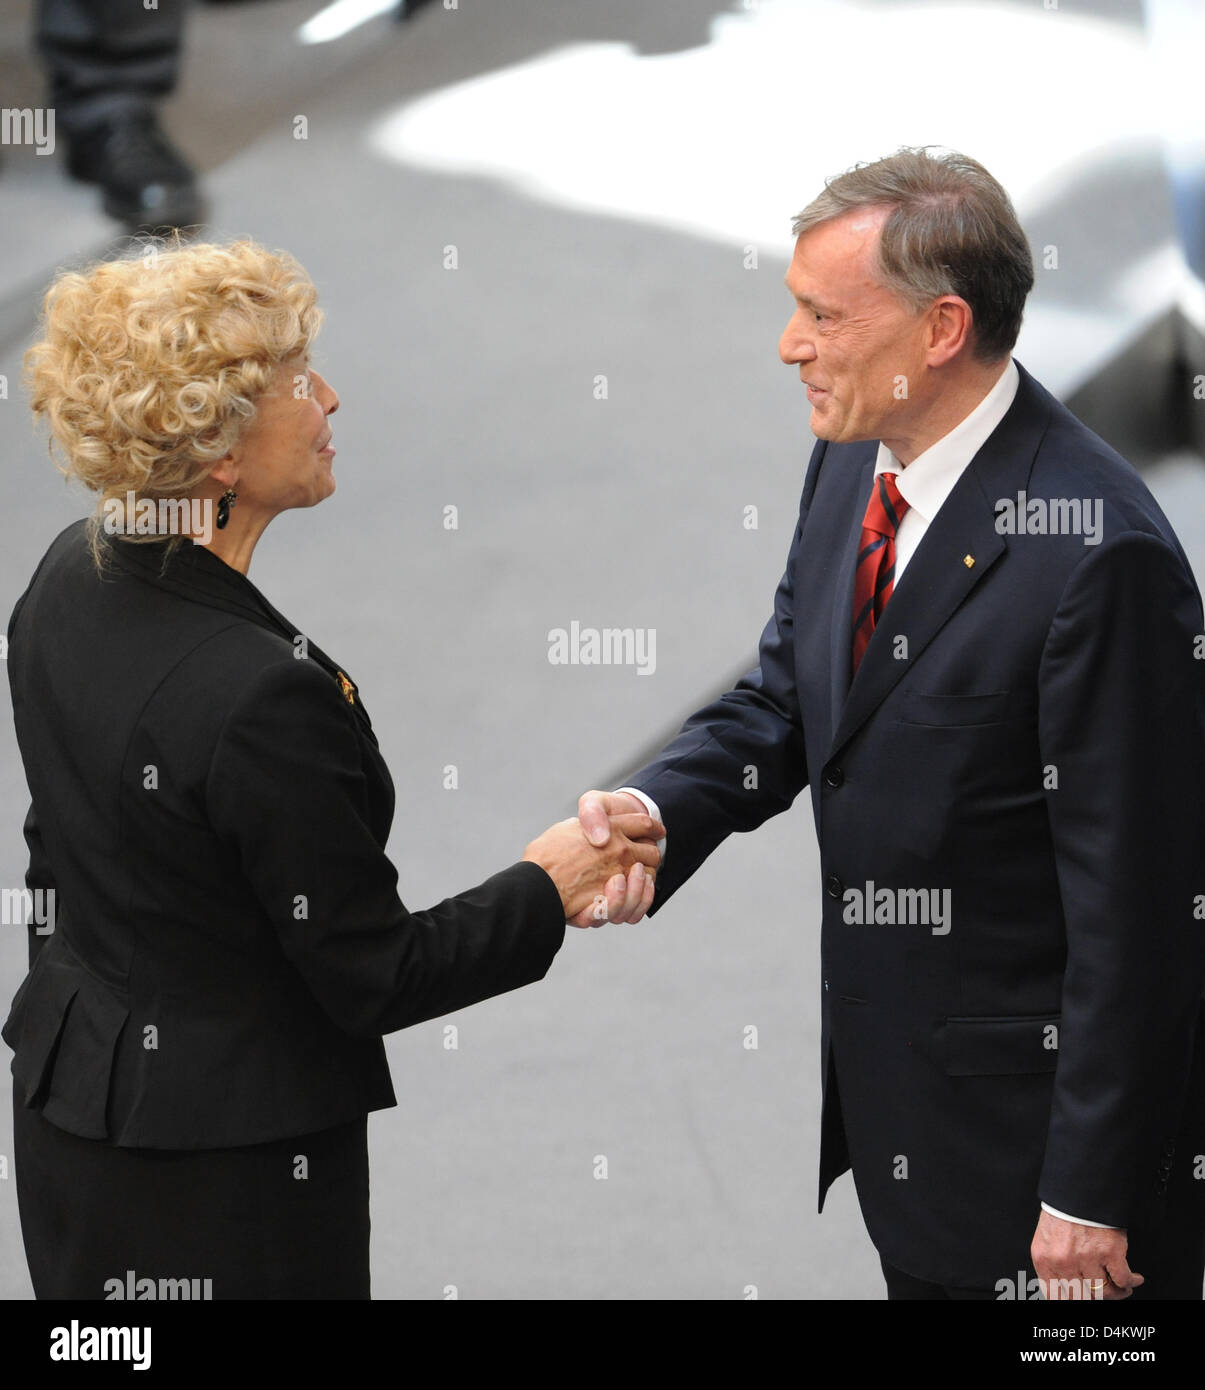 Candidate of the SPD Gesine Schwan congratulates Federal German President Horst Koehler on his reelection at the 13th Federal Convention in the plenar hall of the Reichstag building in Berlin, Germany, 23 May 2009. Koehler won the election with 613 votes, the minimum number of necessary votes. Photo: PEER GRIMM Stock Photo